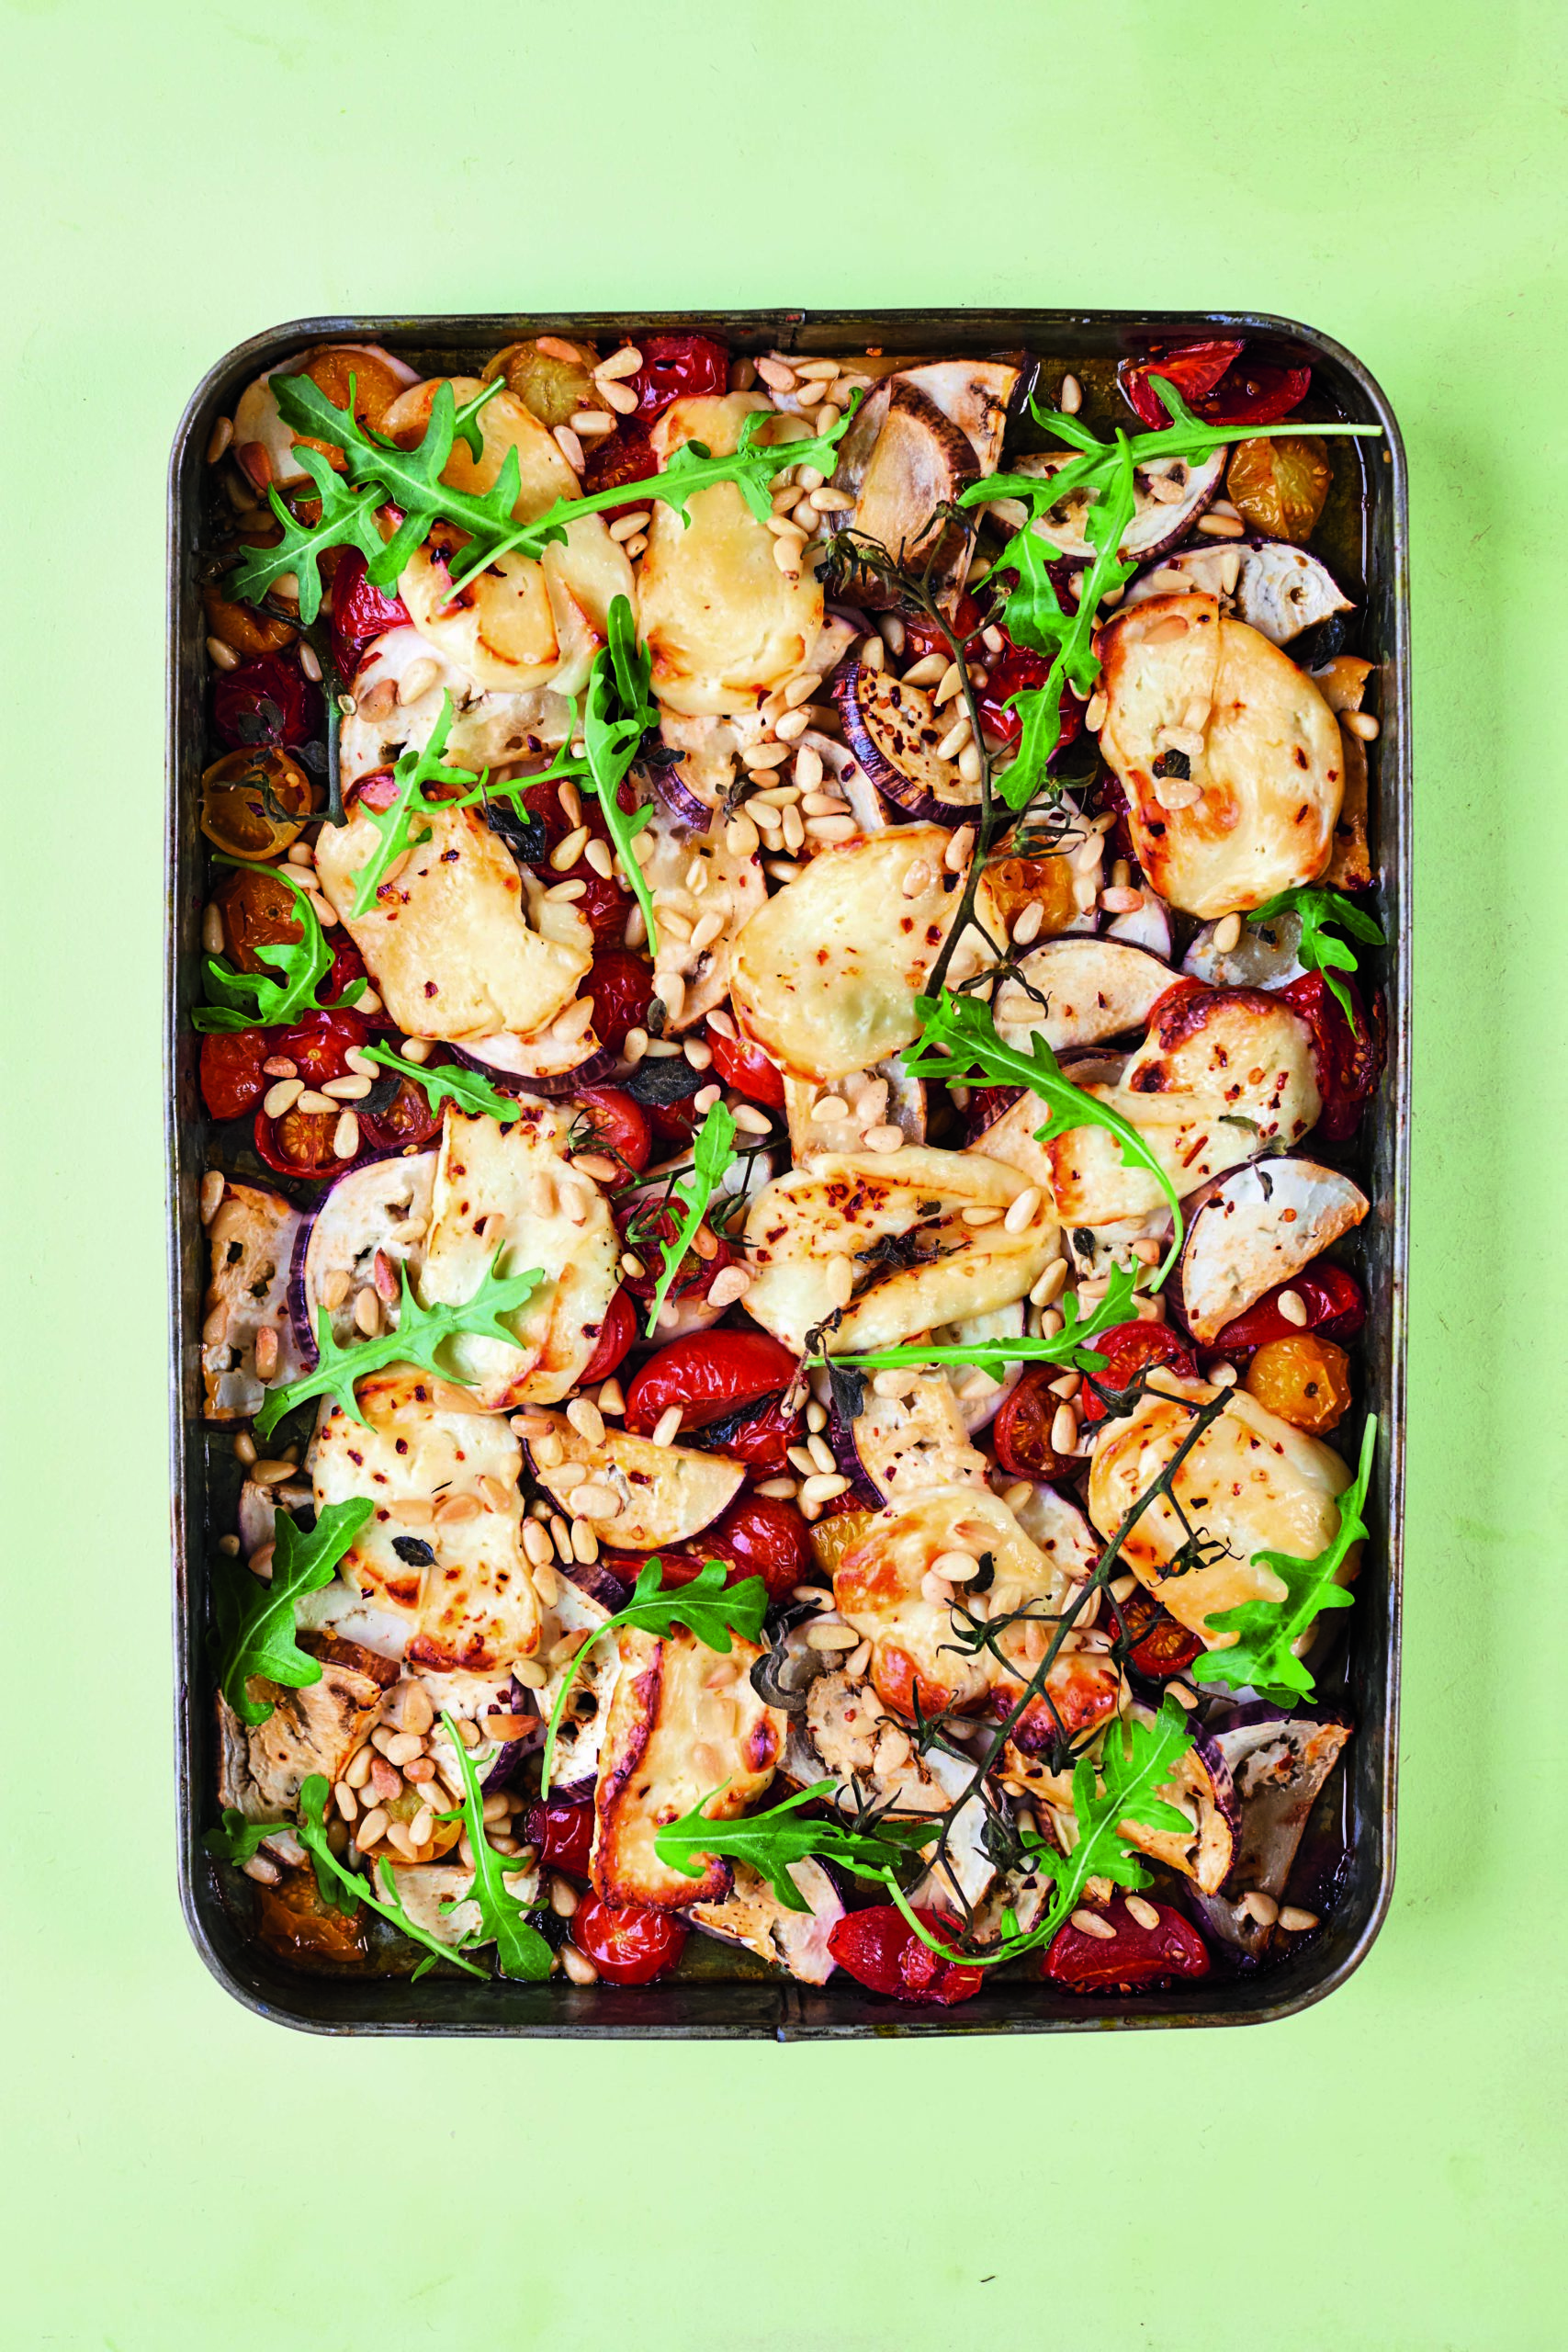 Roasted Halloumi With Aubergines, Tomatoes and Pine Nuts